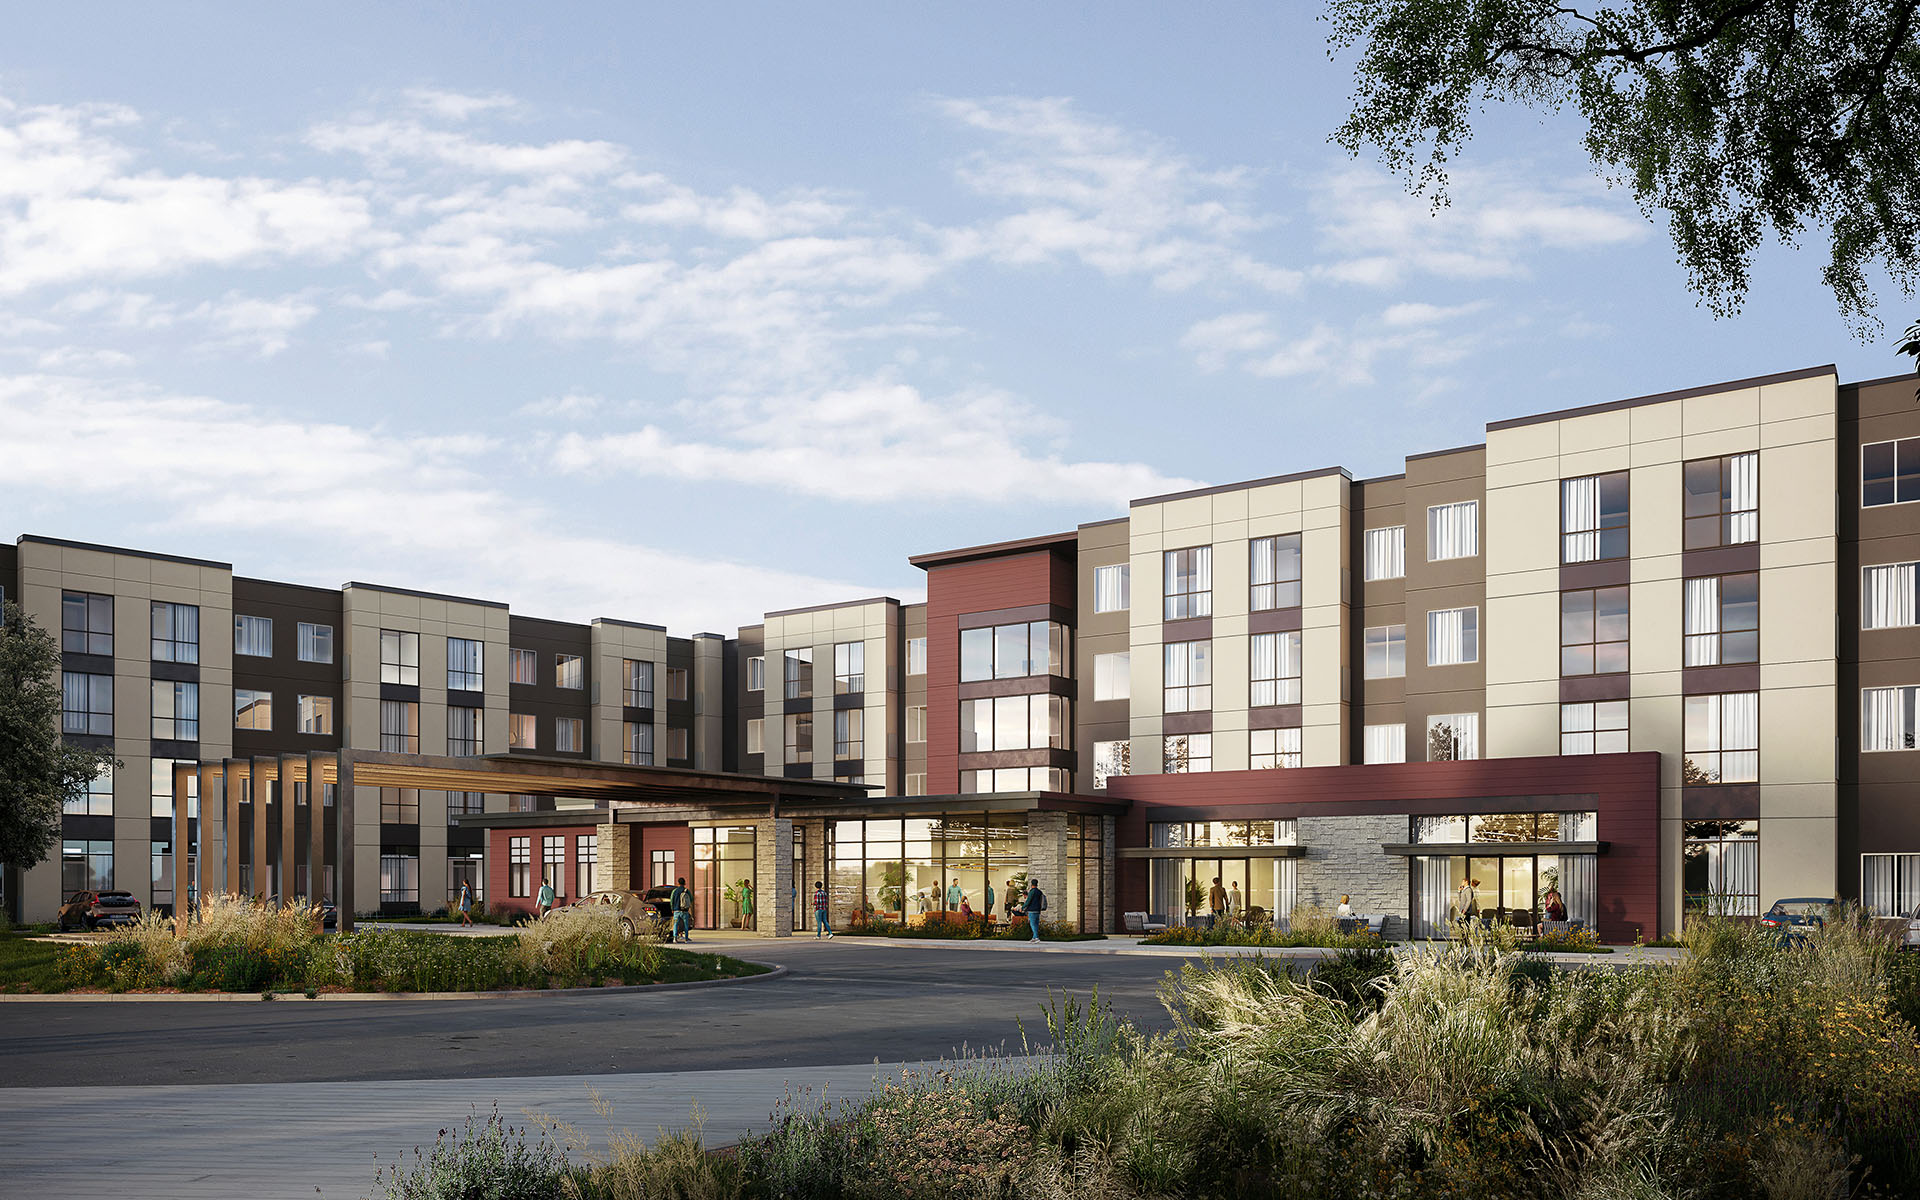 exterior rendering of hotel in Idaho with refine rustic finishes